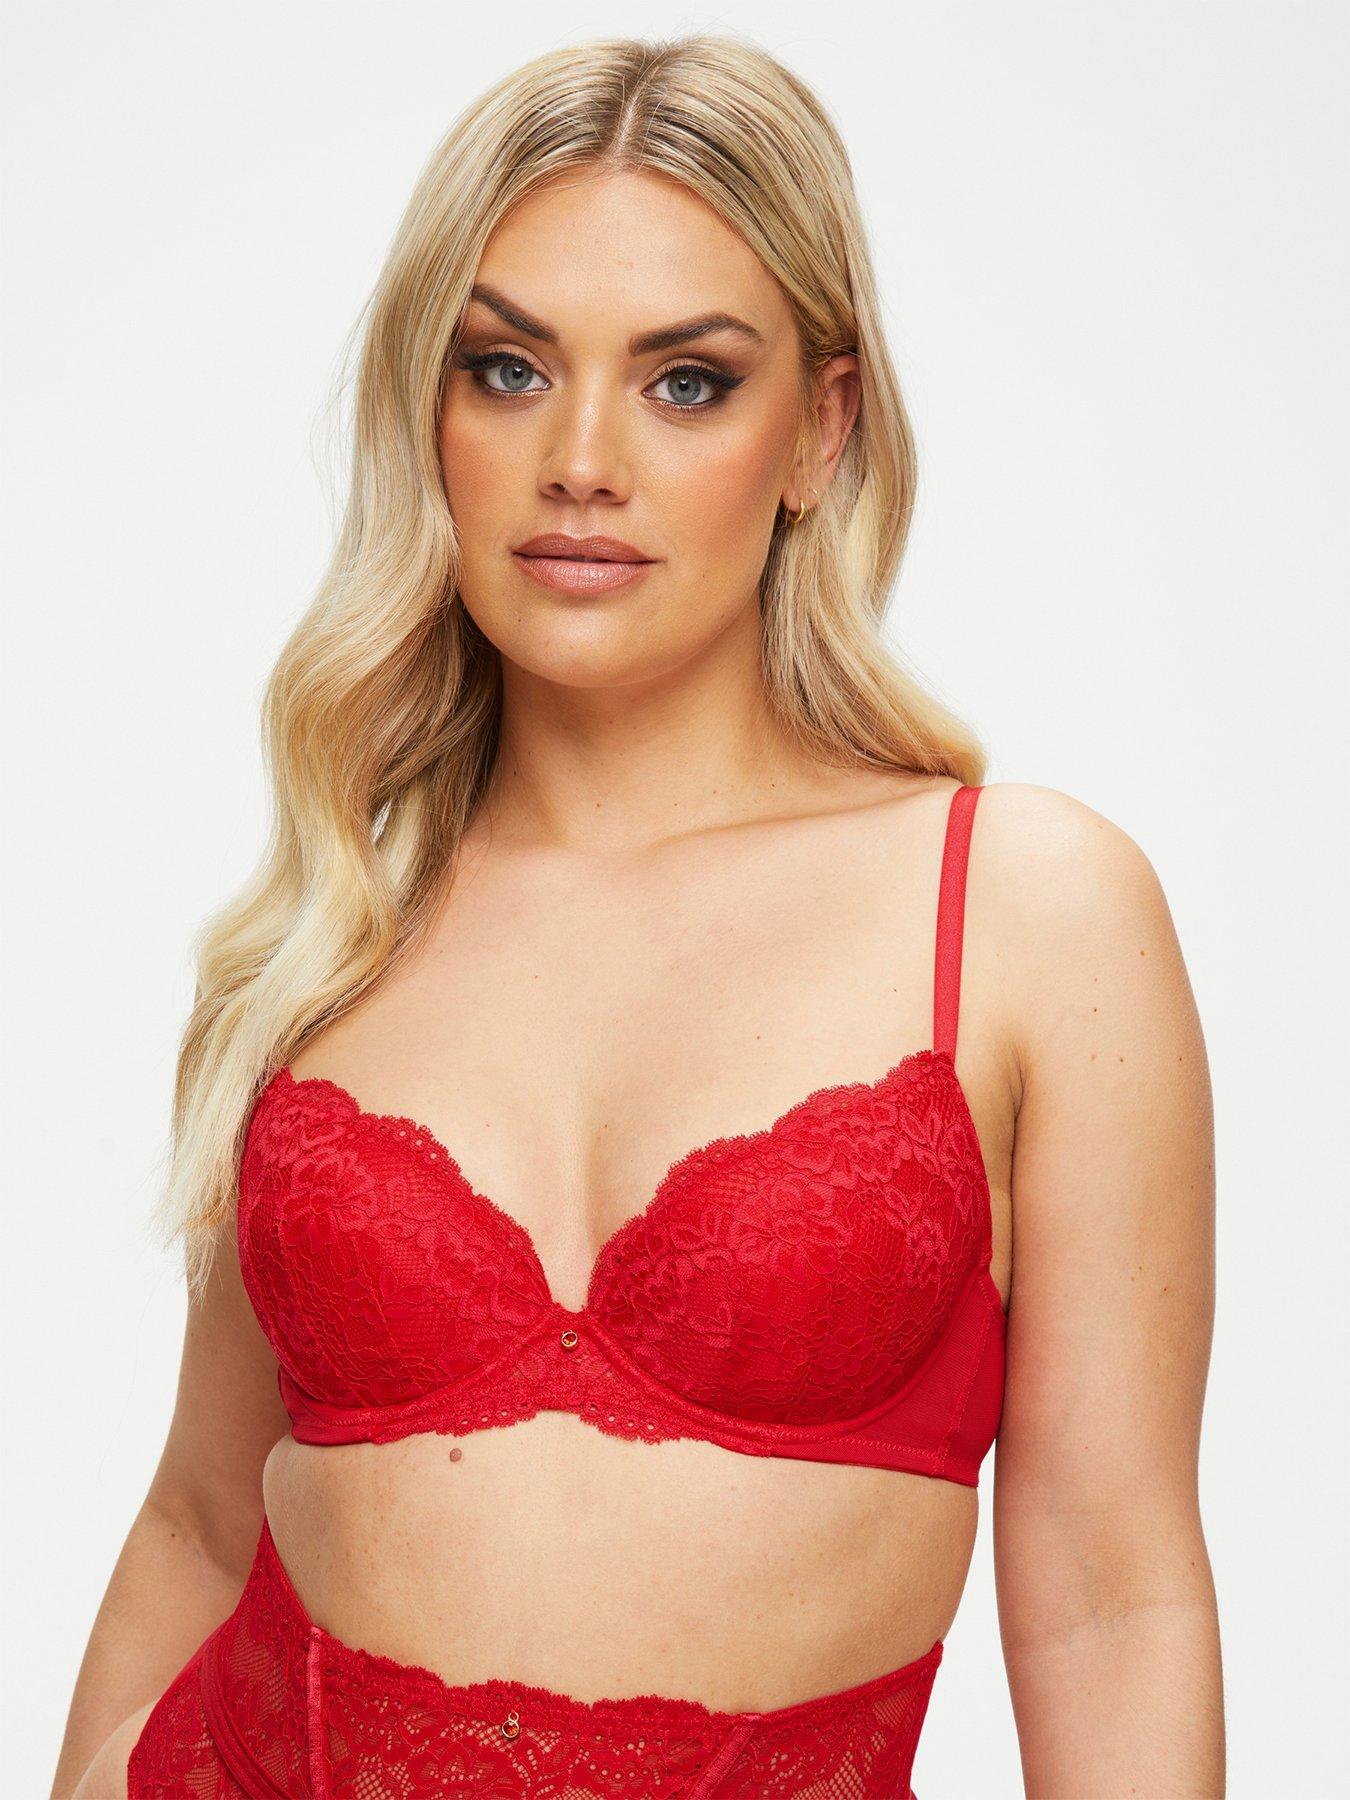 https://media.very.co.uk/i/very/U6N7E_SQ1_0000002882_BRIGHT_RED_MDf/ann-summers-sexy-lace-planet-plunge-red.jpg?$180x240_retinamobilex2$